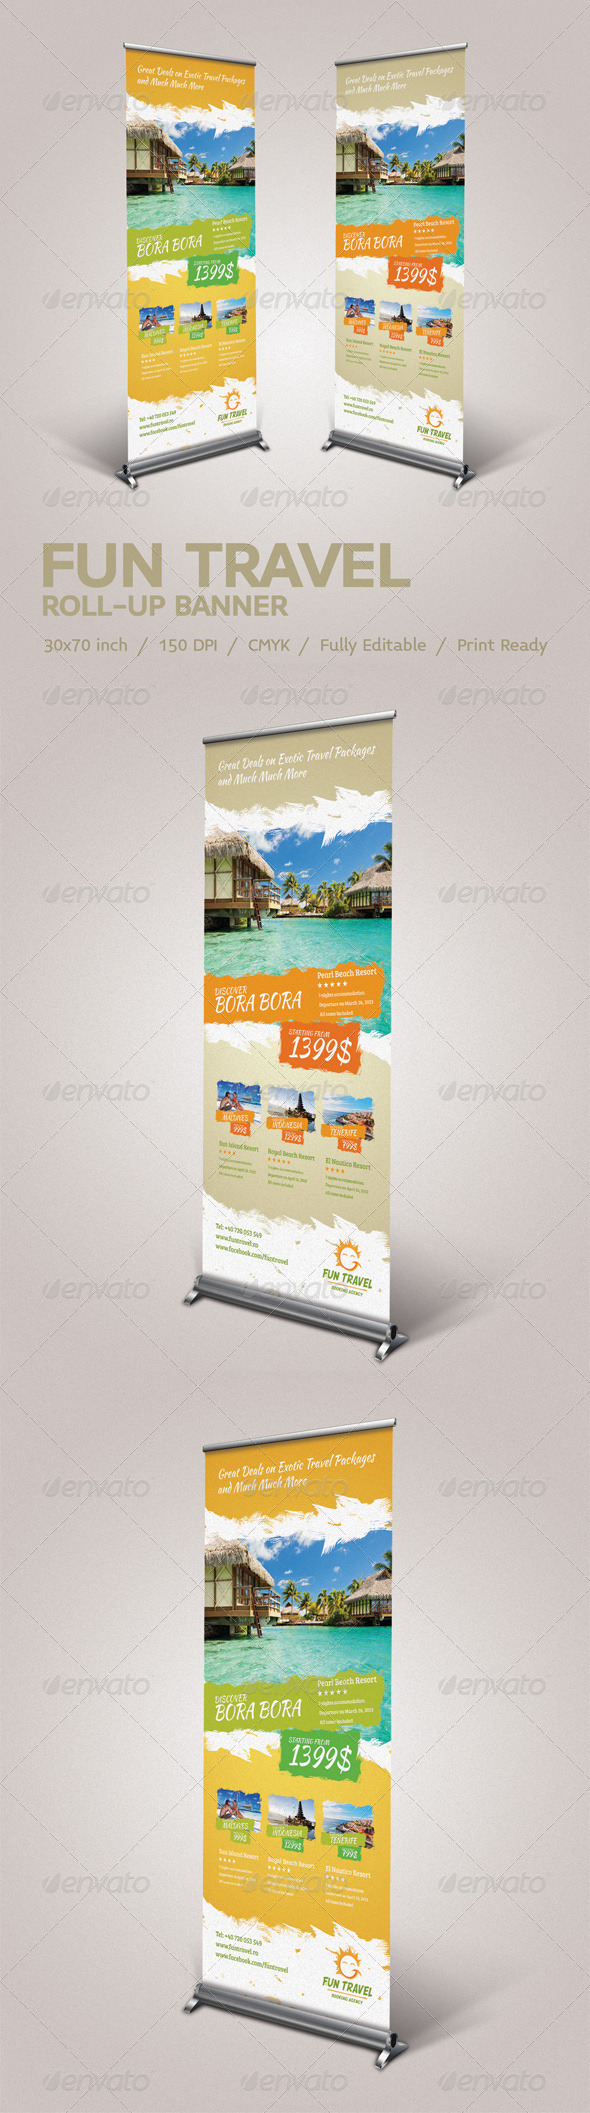 Fun Travel Roll-Up Banner